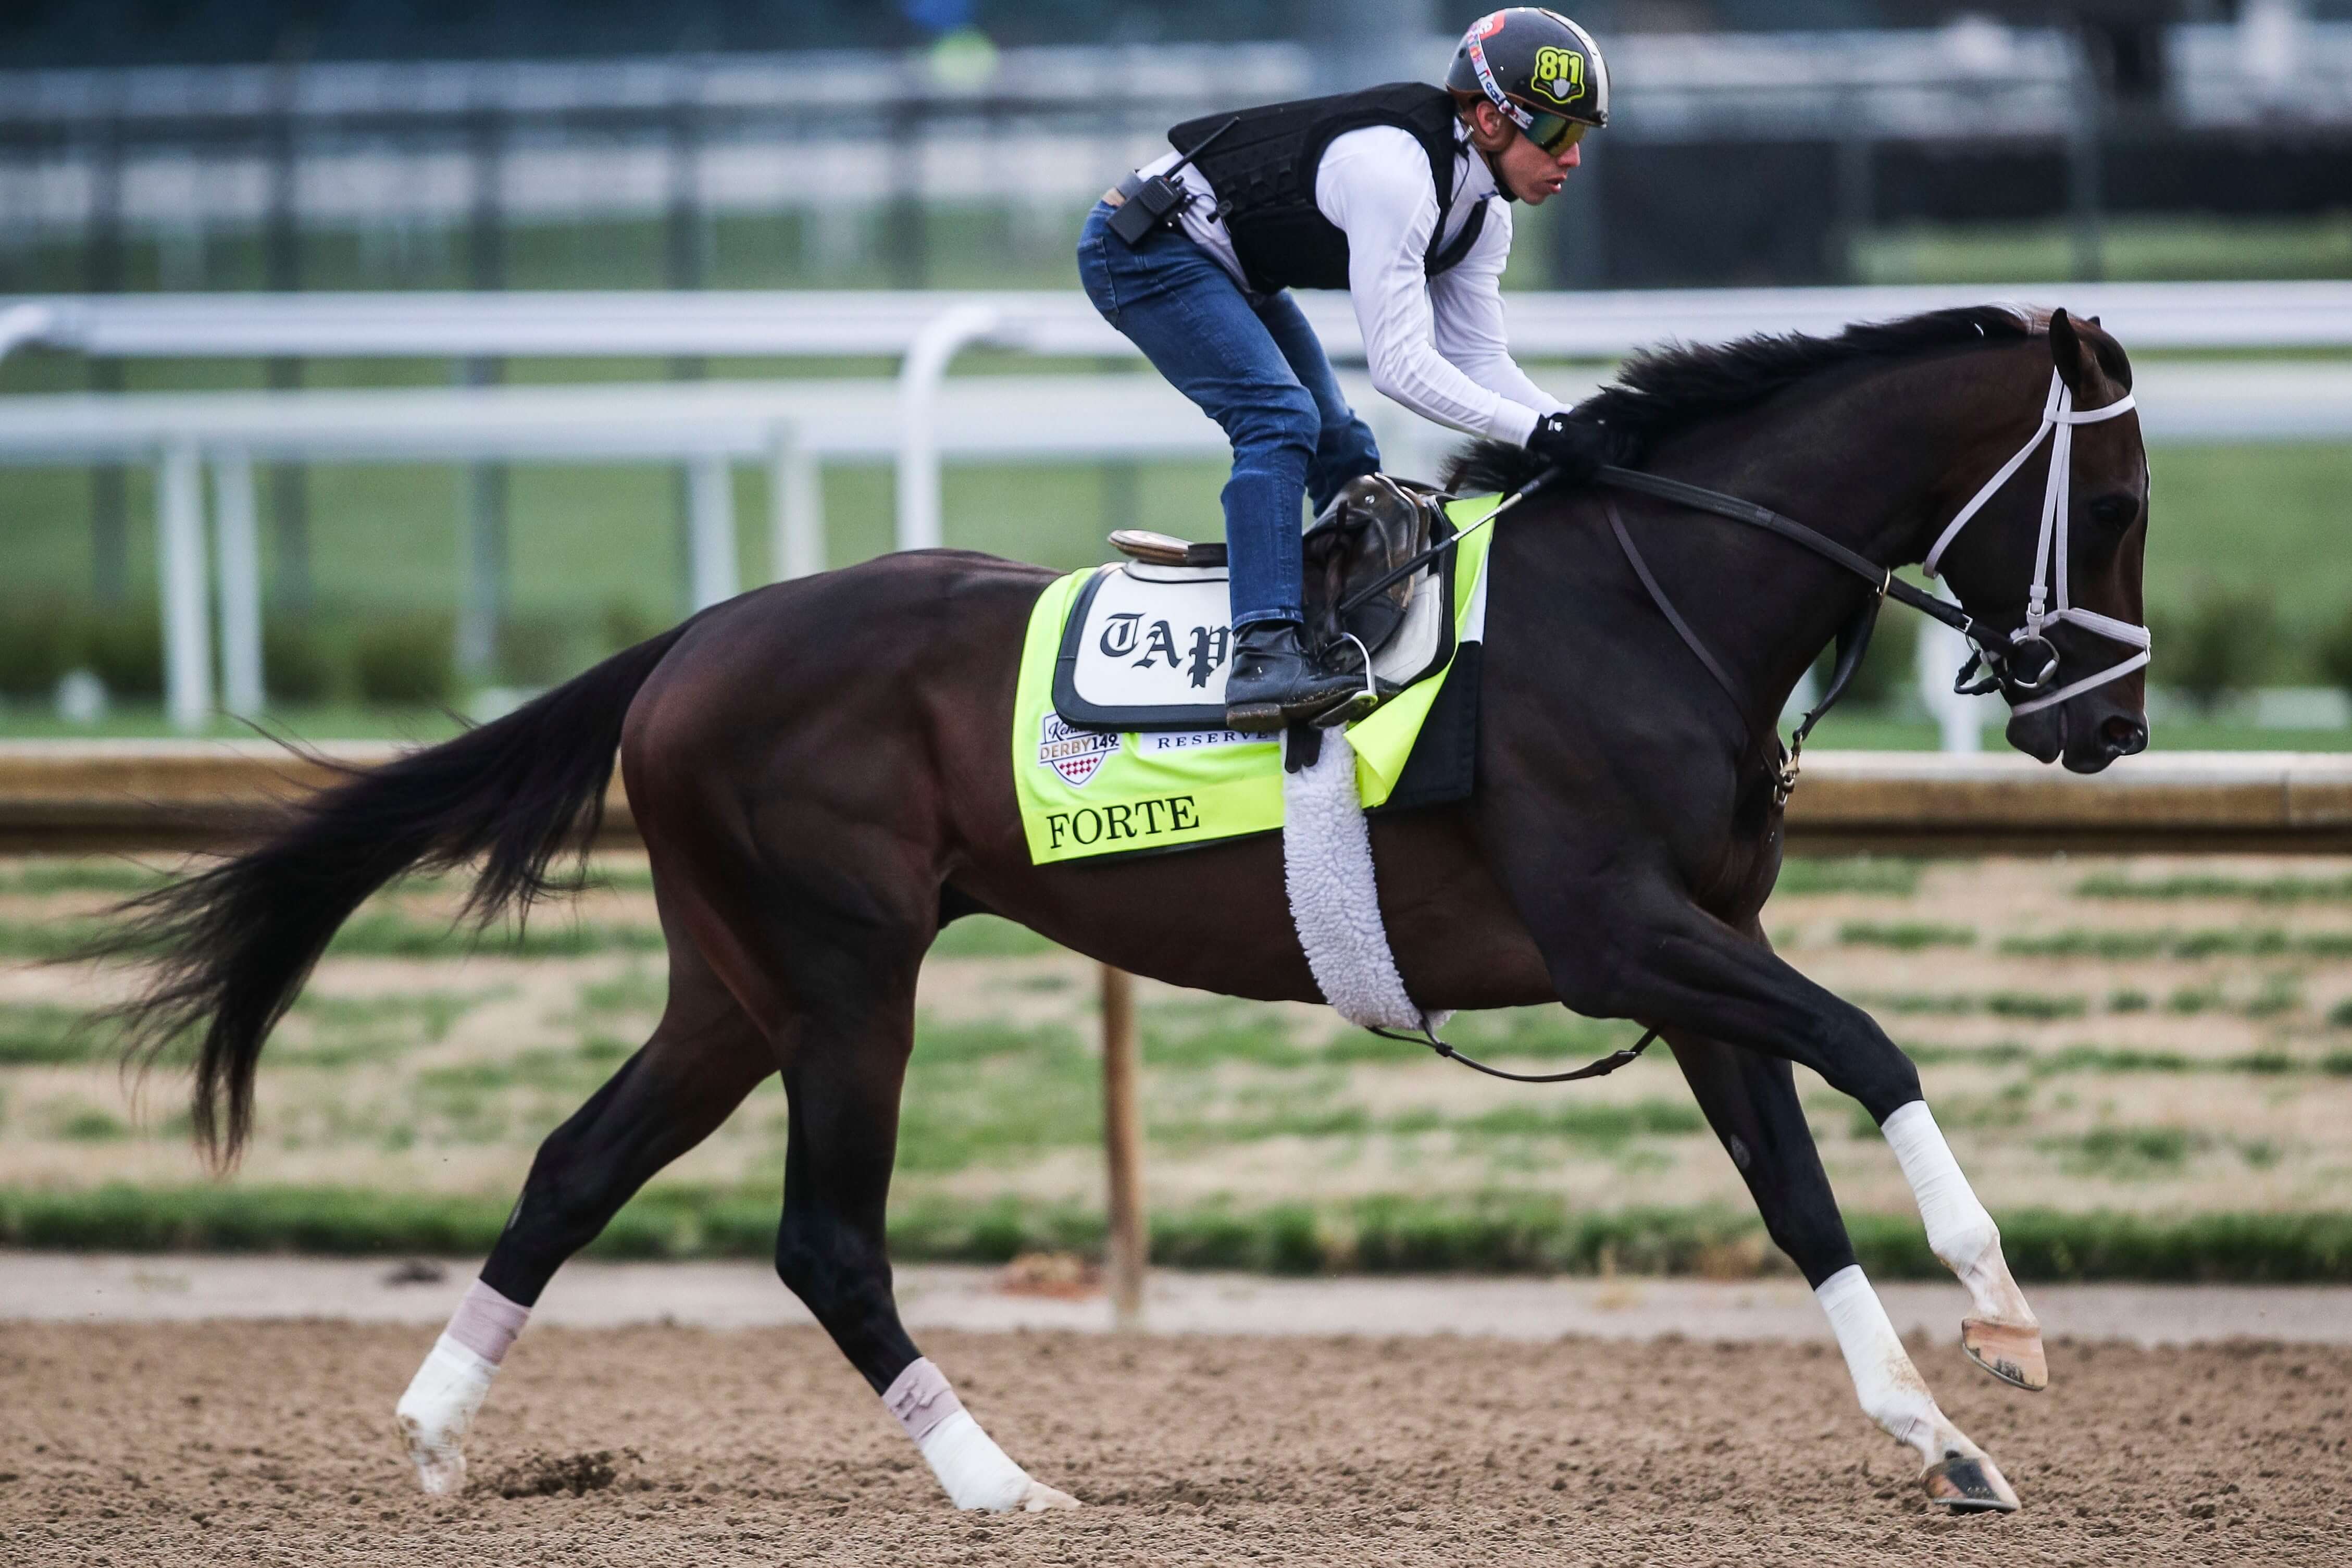 How To Bet - 2023 Belmont Stakes Odds: Forte Figures to be Favored